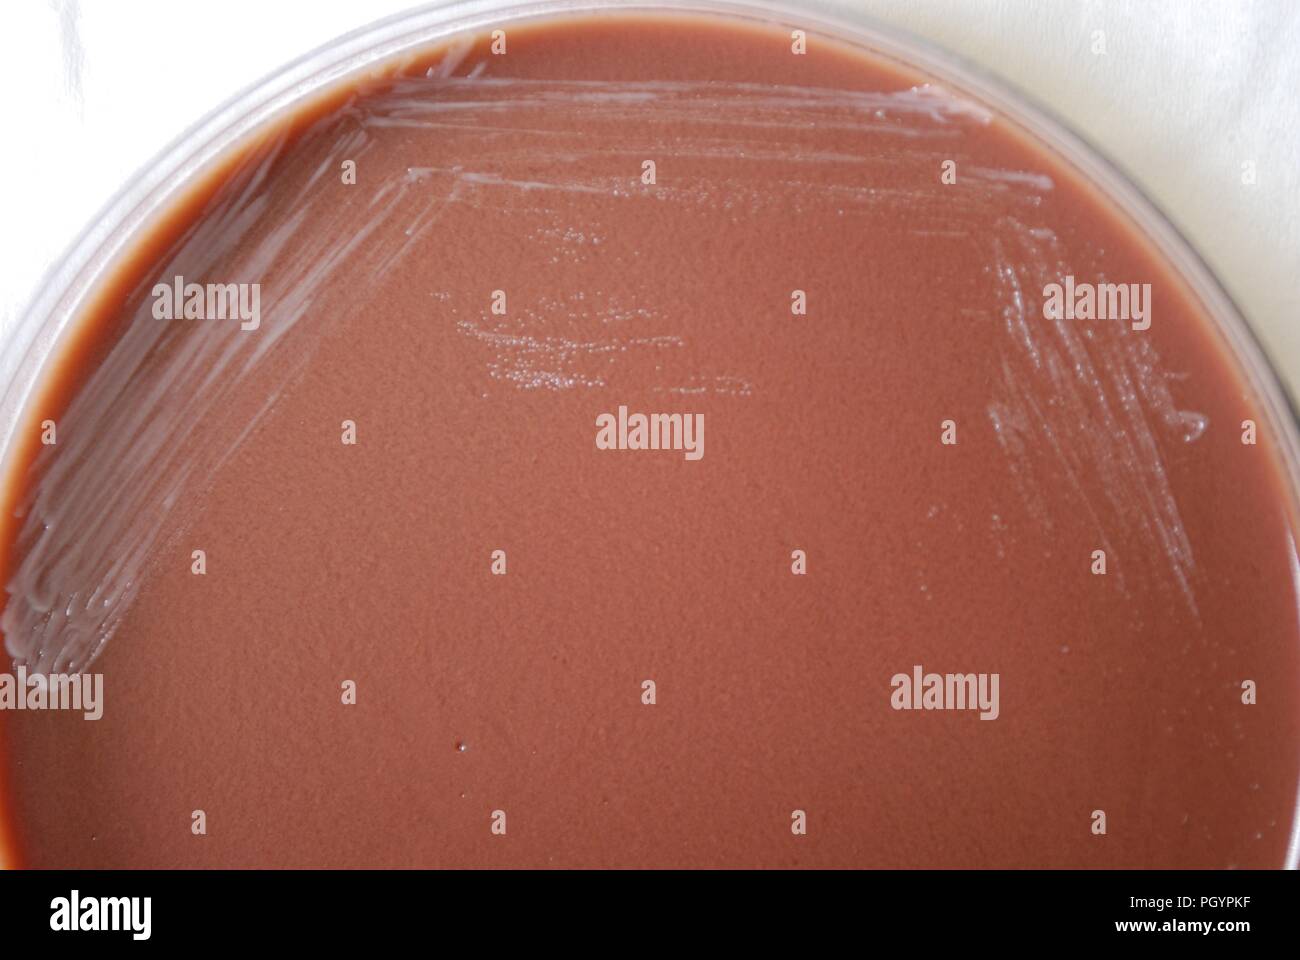 Colonial morphology of Gram-negative Brucella abortus bacteria grown 48 hours on a medium of chocolate agar, 2010. Image courtesy Centers for Disease Control (CDC) / Dr Todd Parker, Audra Marsh. () Stock Photo